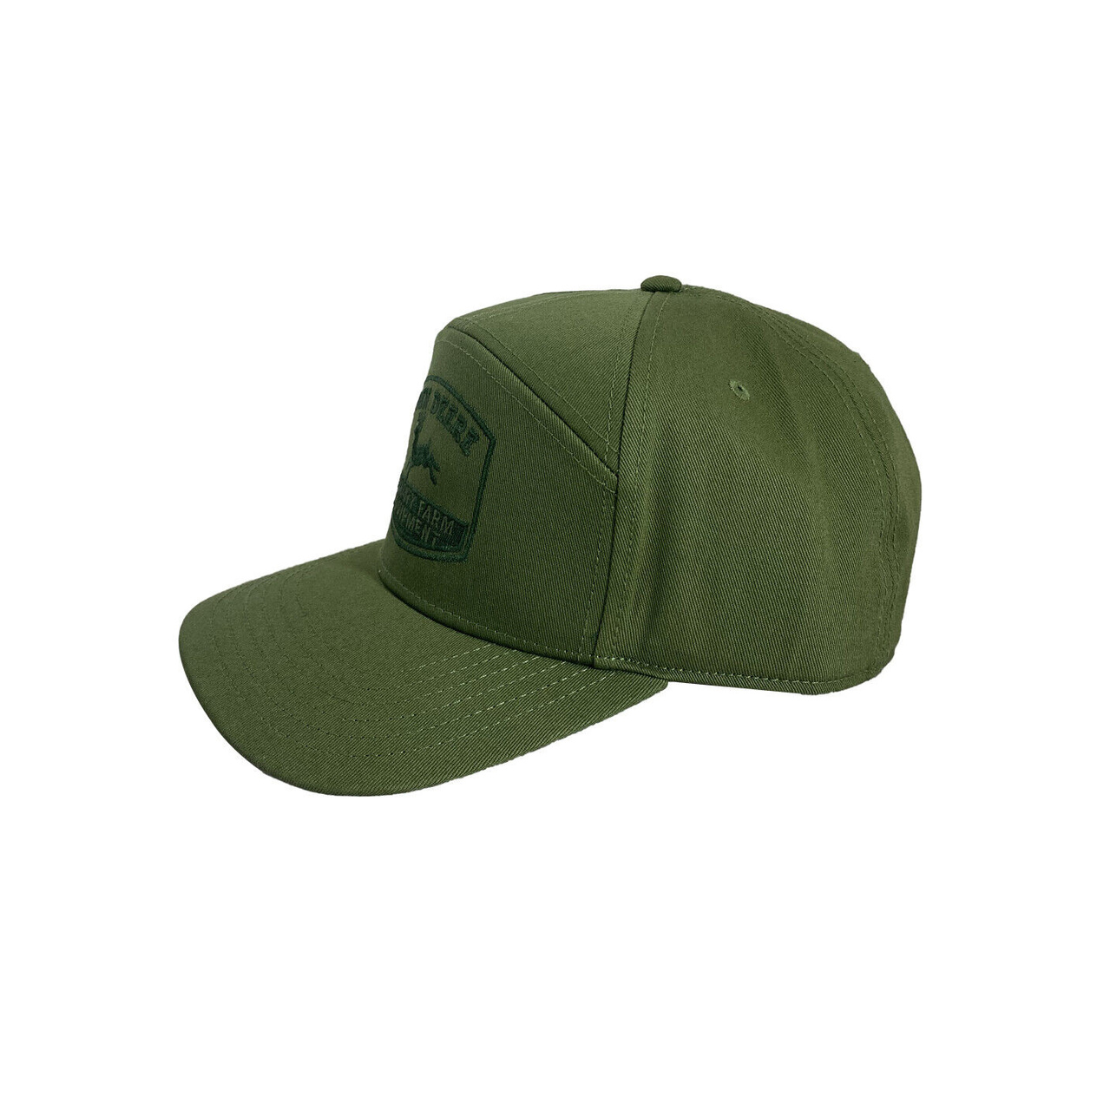 7 Panel Embroided Cap OS Olive Mens Hats by John Deere | The Bloke Shop